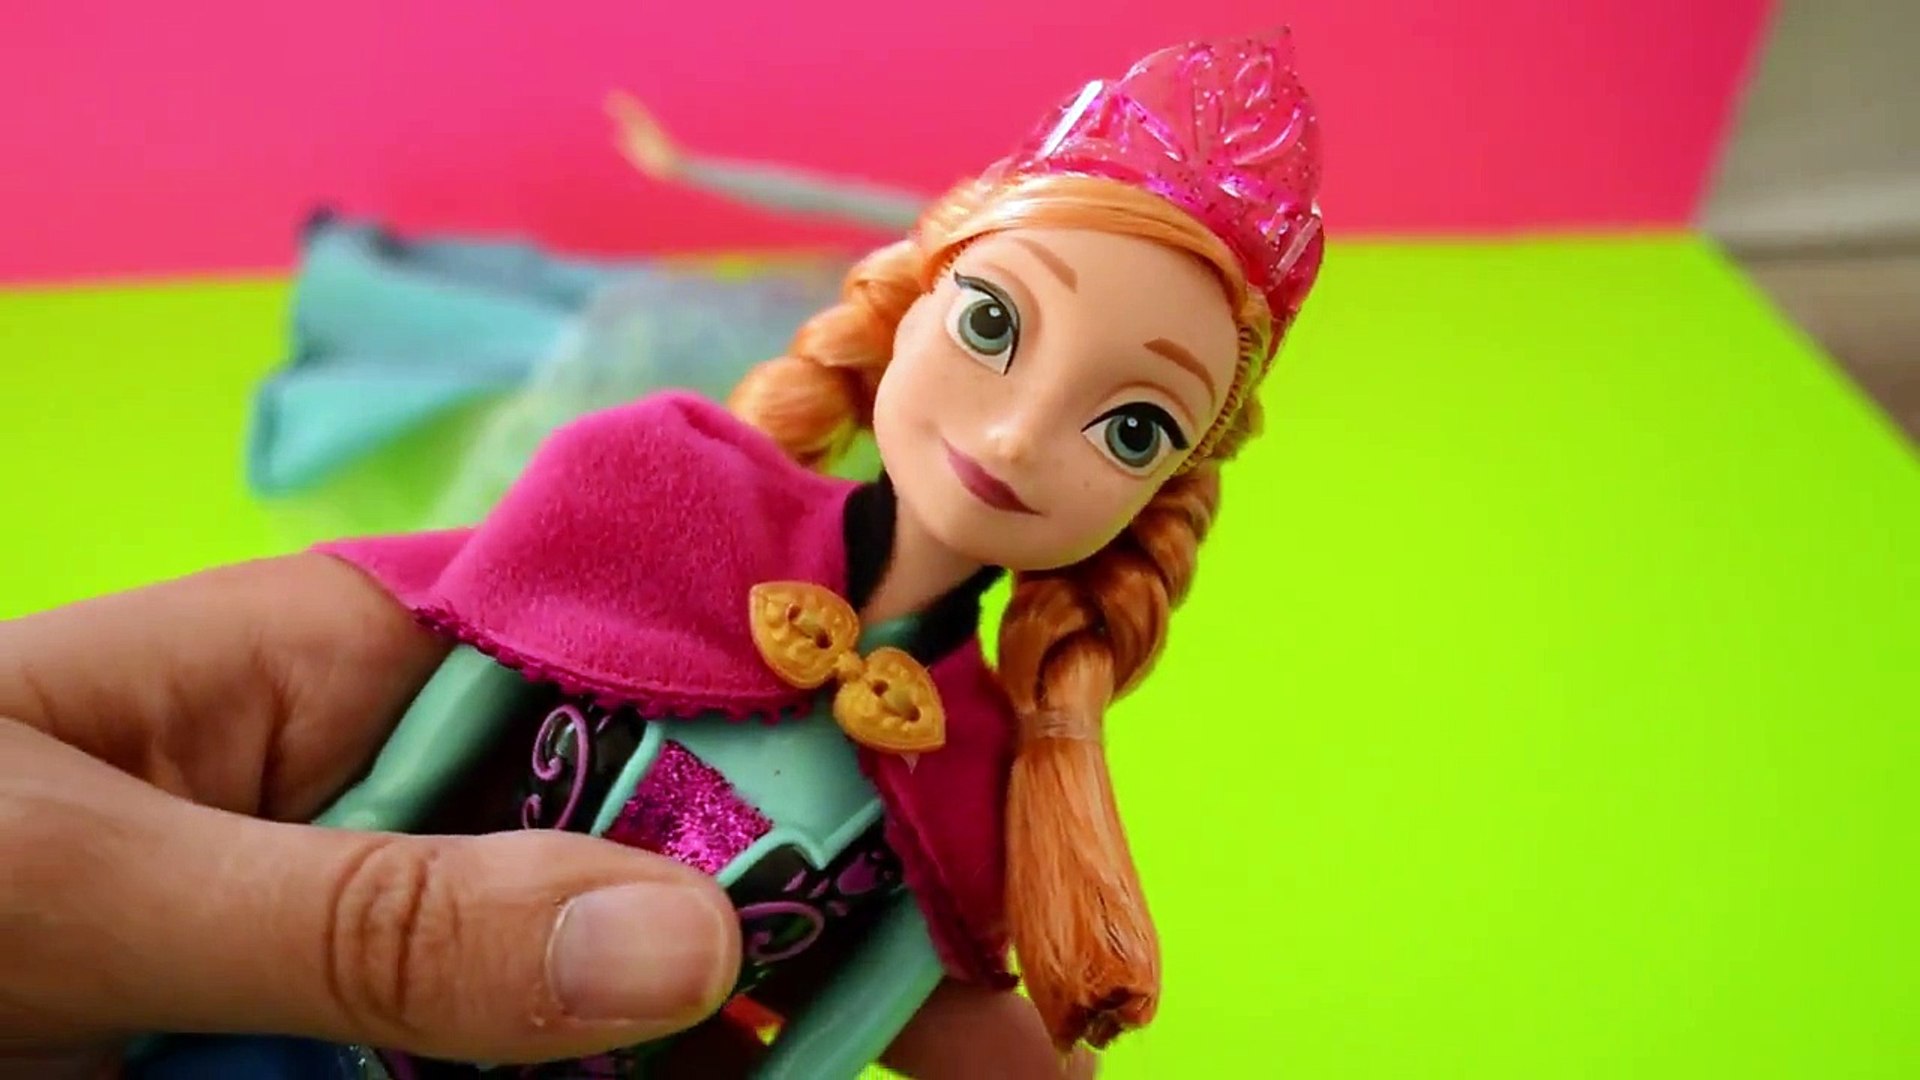 toy videos Frozen toy videos Princess Anna and Elsa of Arendelle dolls  unboxing - Dailymotion Video